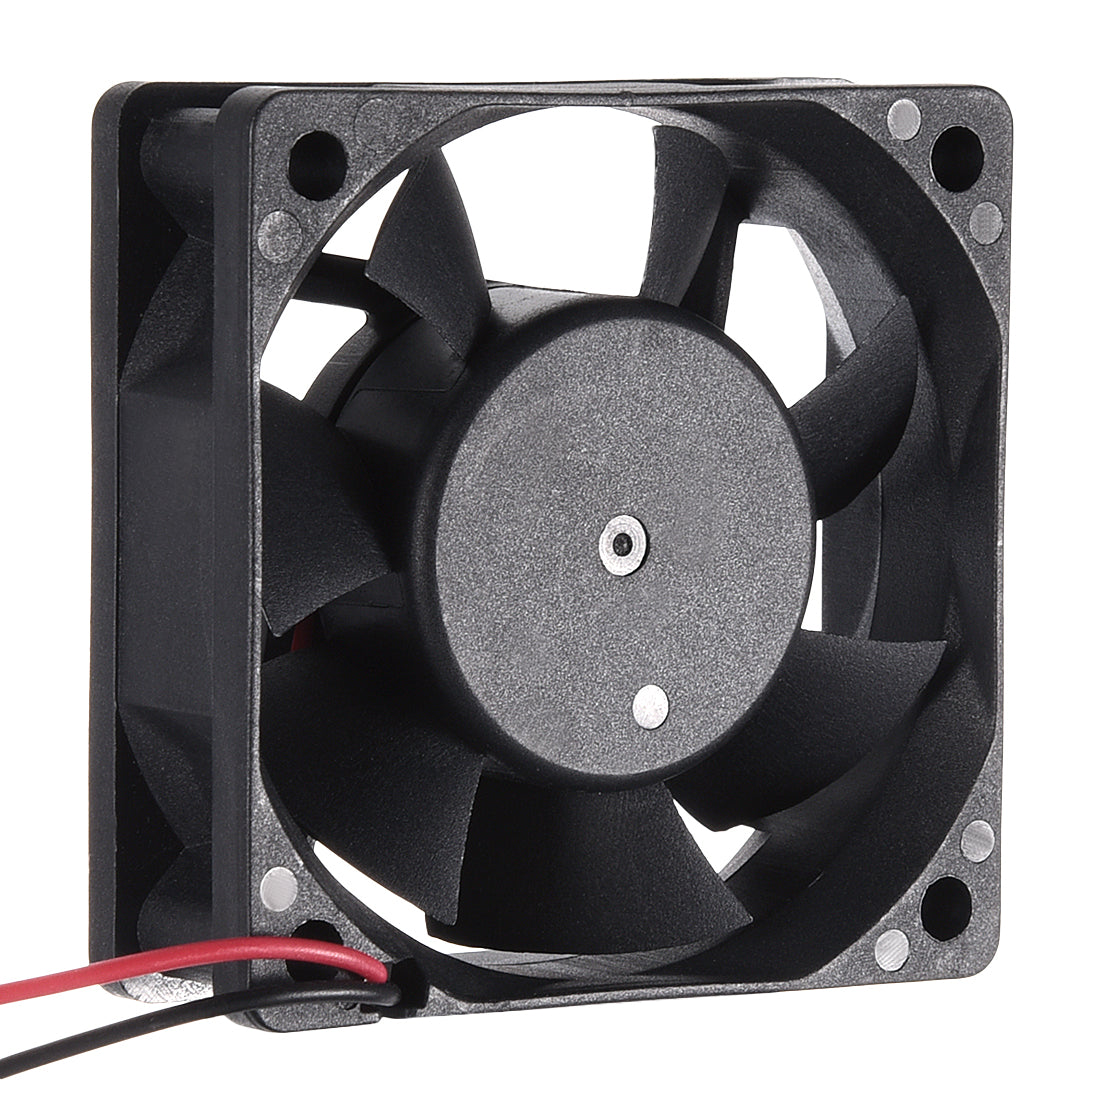 uxcell Uxcell 60mm x 60mm x 20mm 24V Brushless DC Cooling Fan #0359